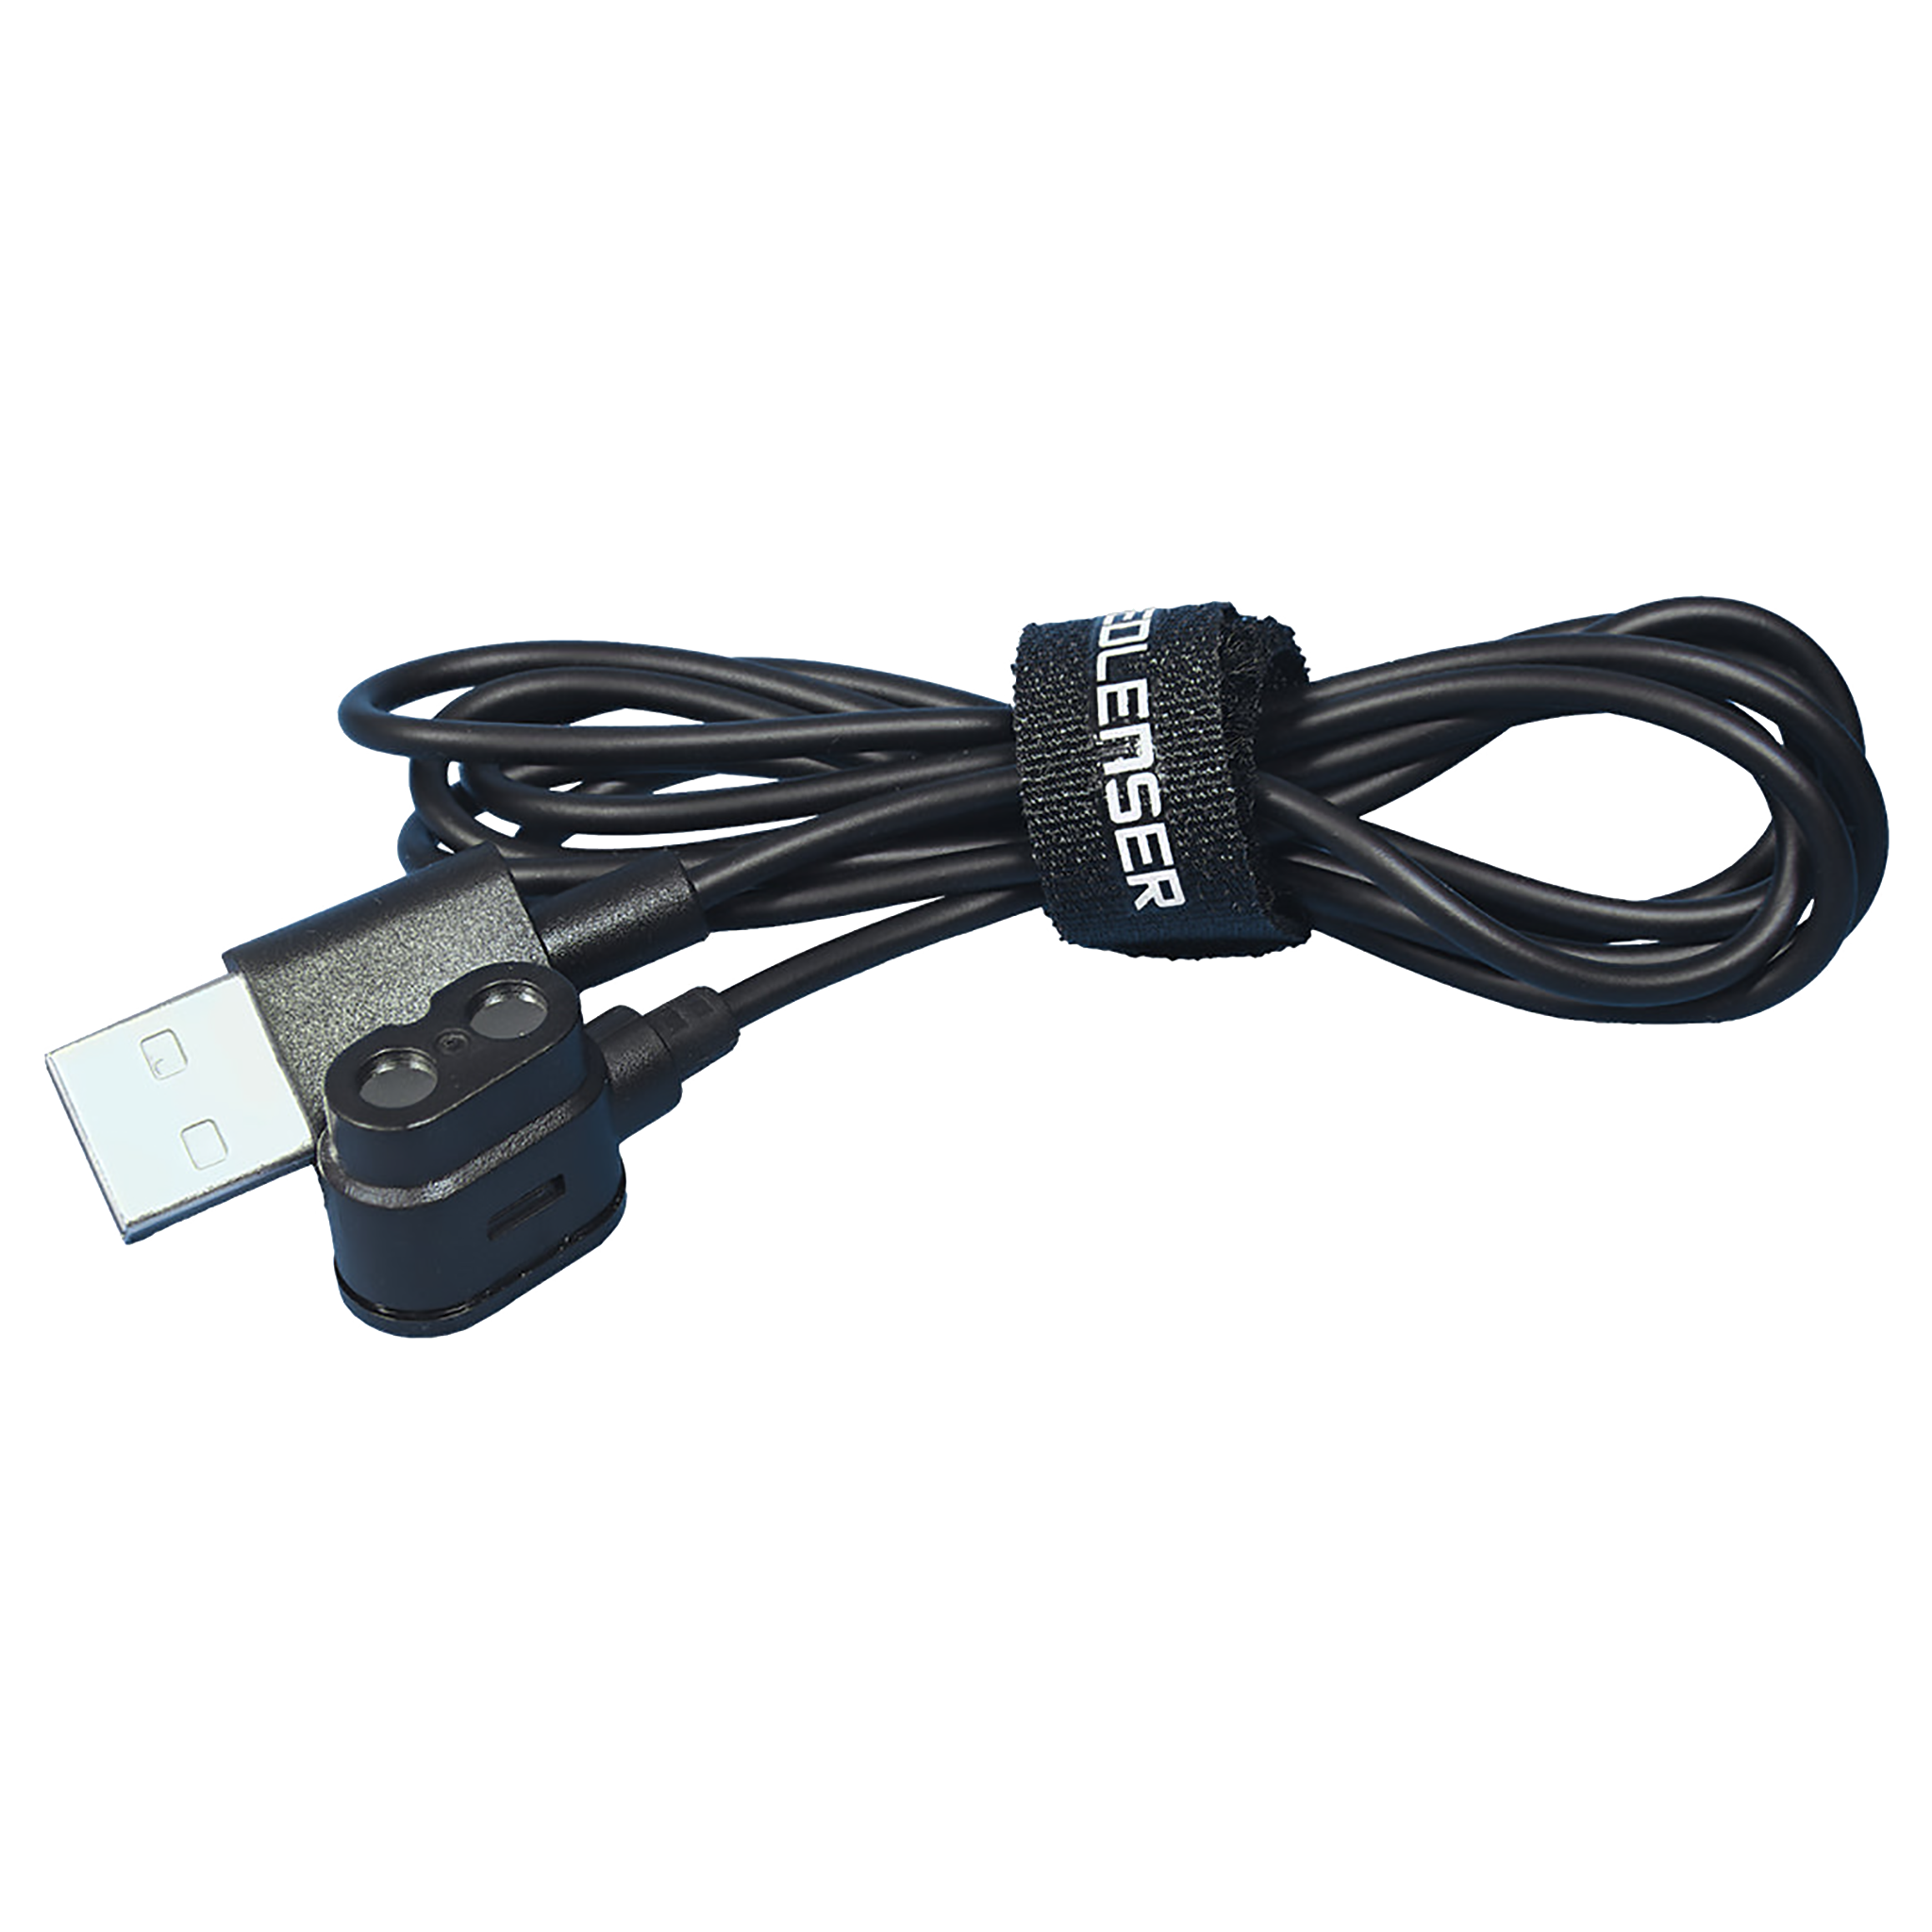 Magnetic Charging Cable | Suits iH5R, iH9R, MH4, MH5, MH7, MH8, MH11, iH11R & ML4 Lights